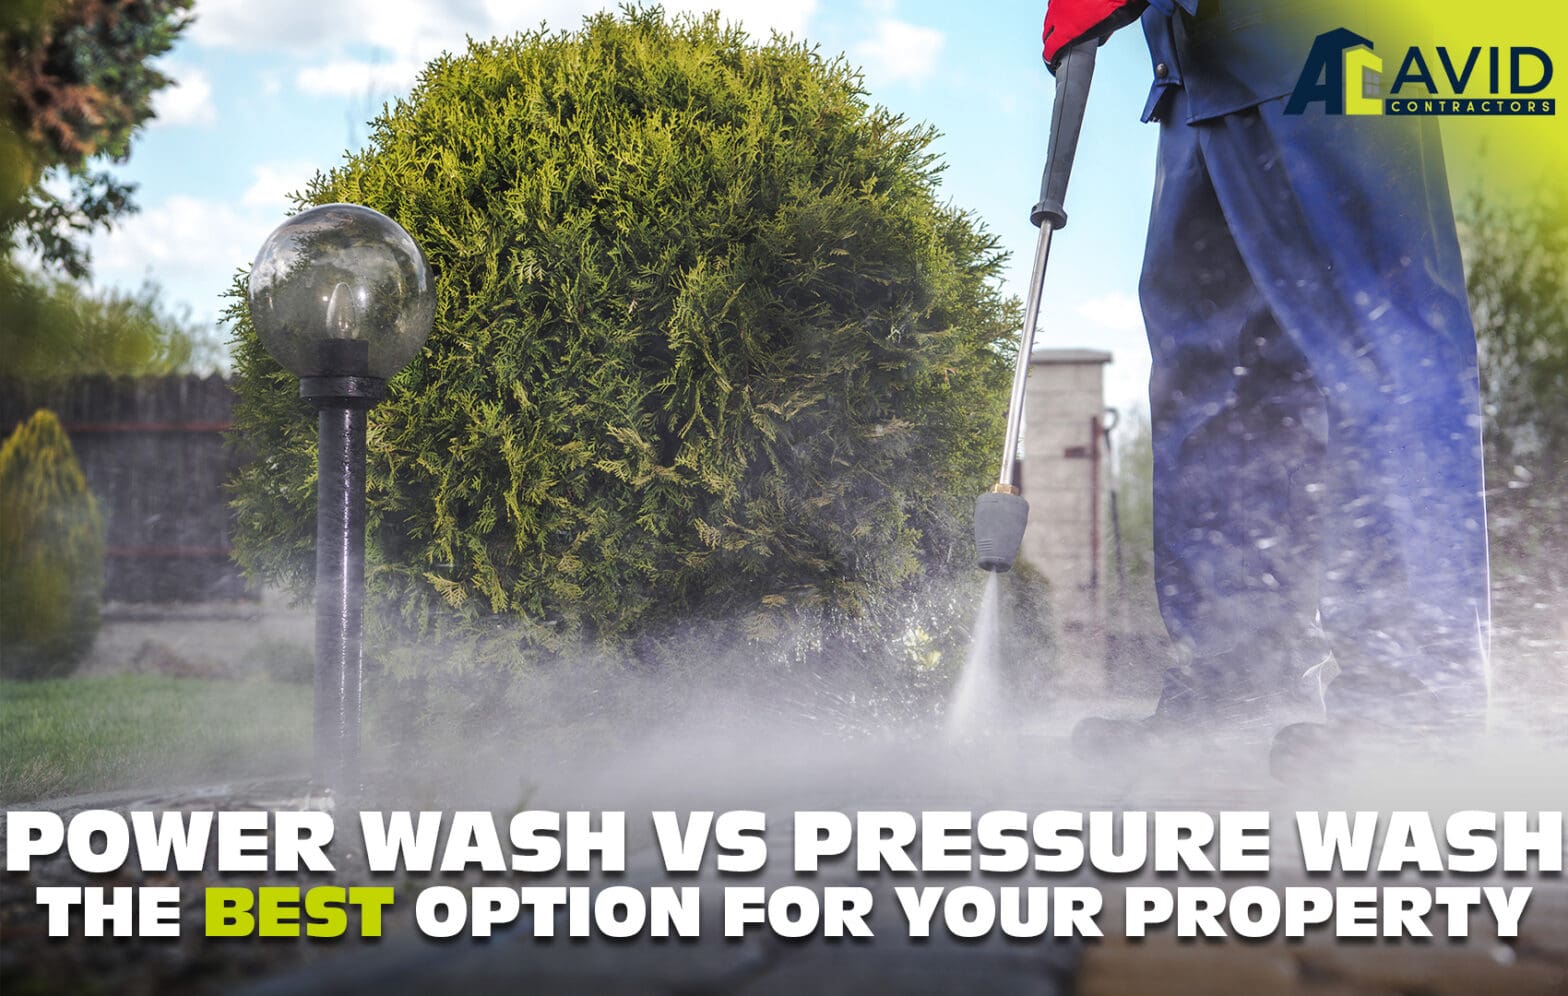 Power Washing vs Pressure Washing: The Best Option For Your Property?